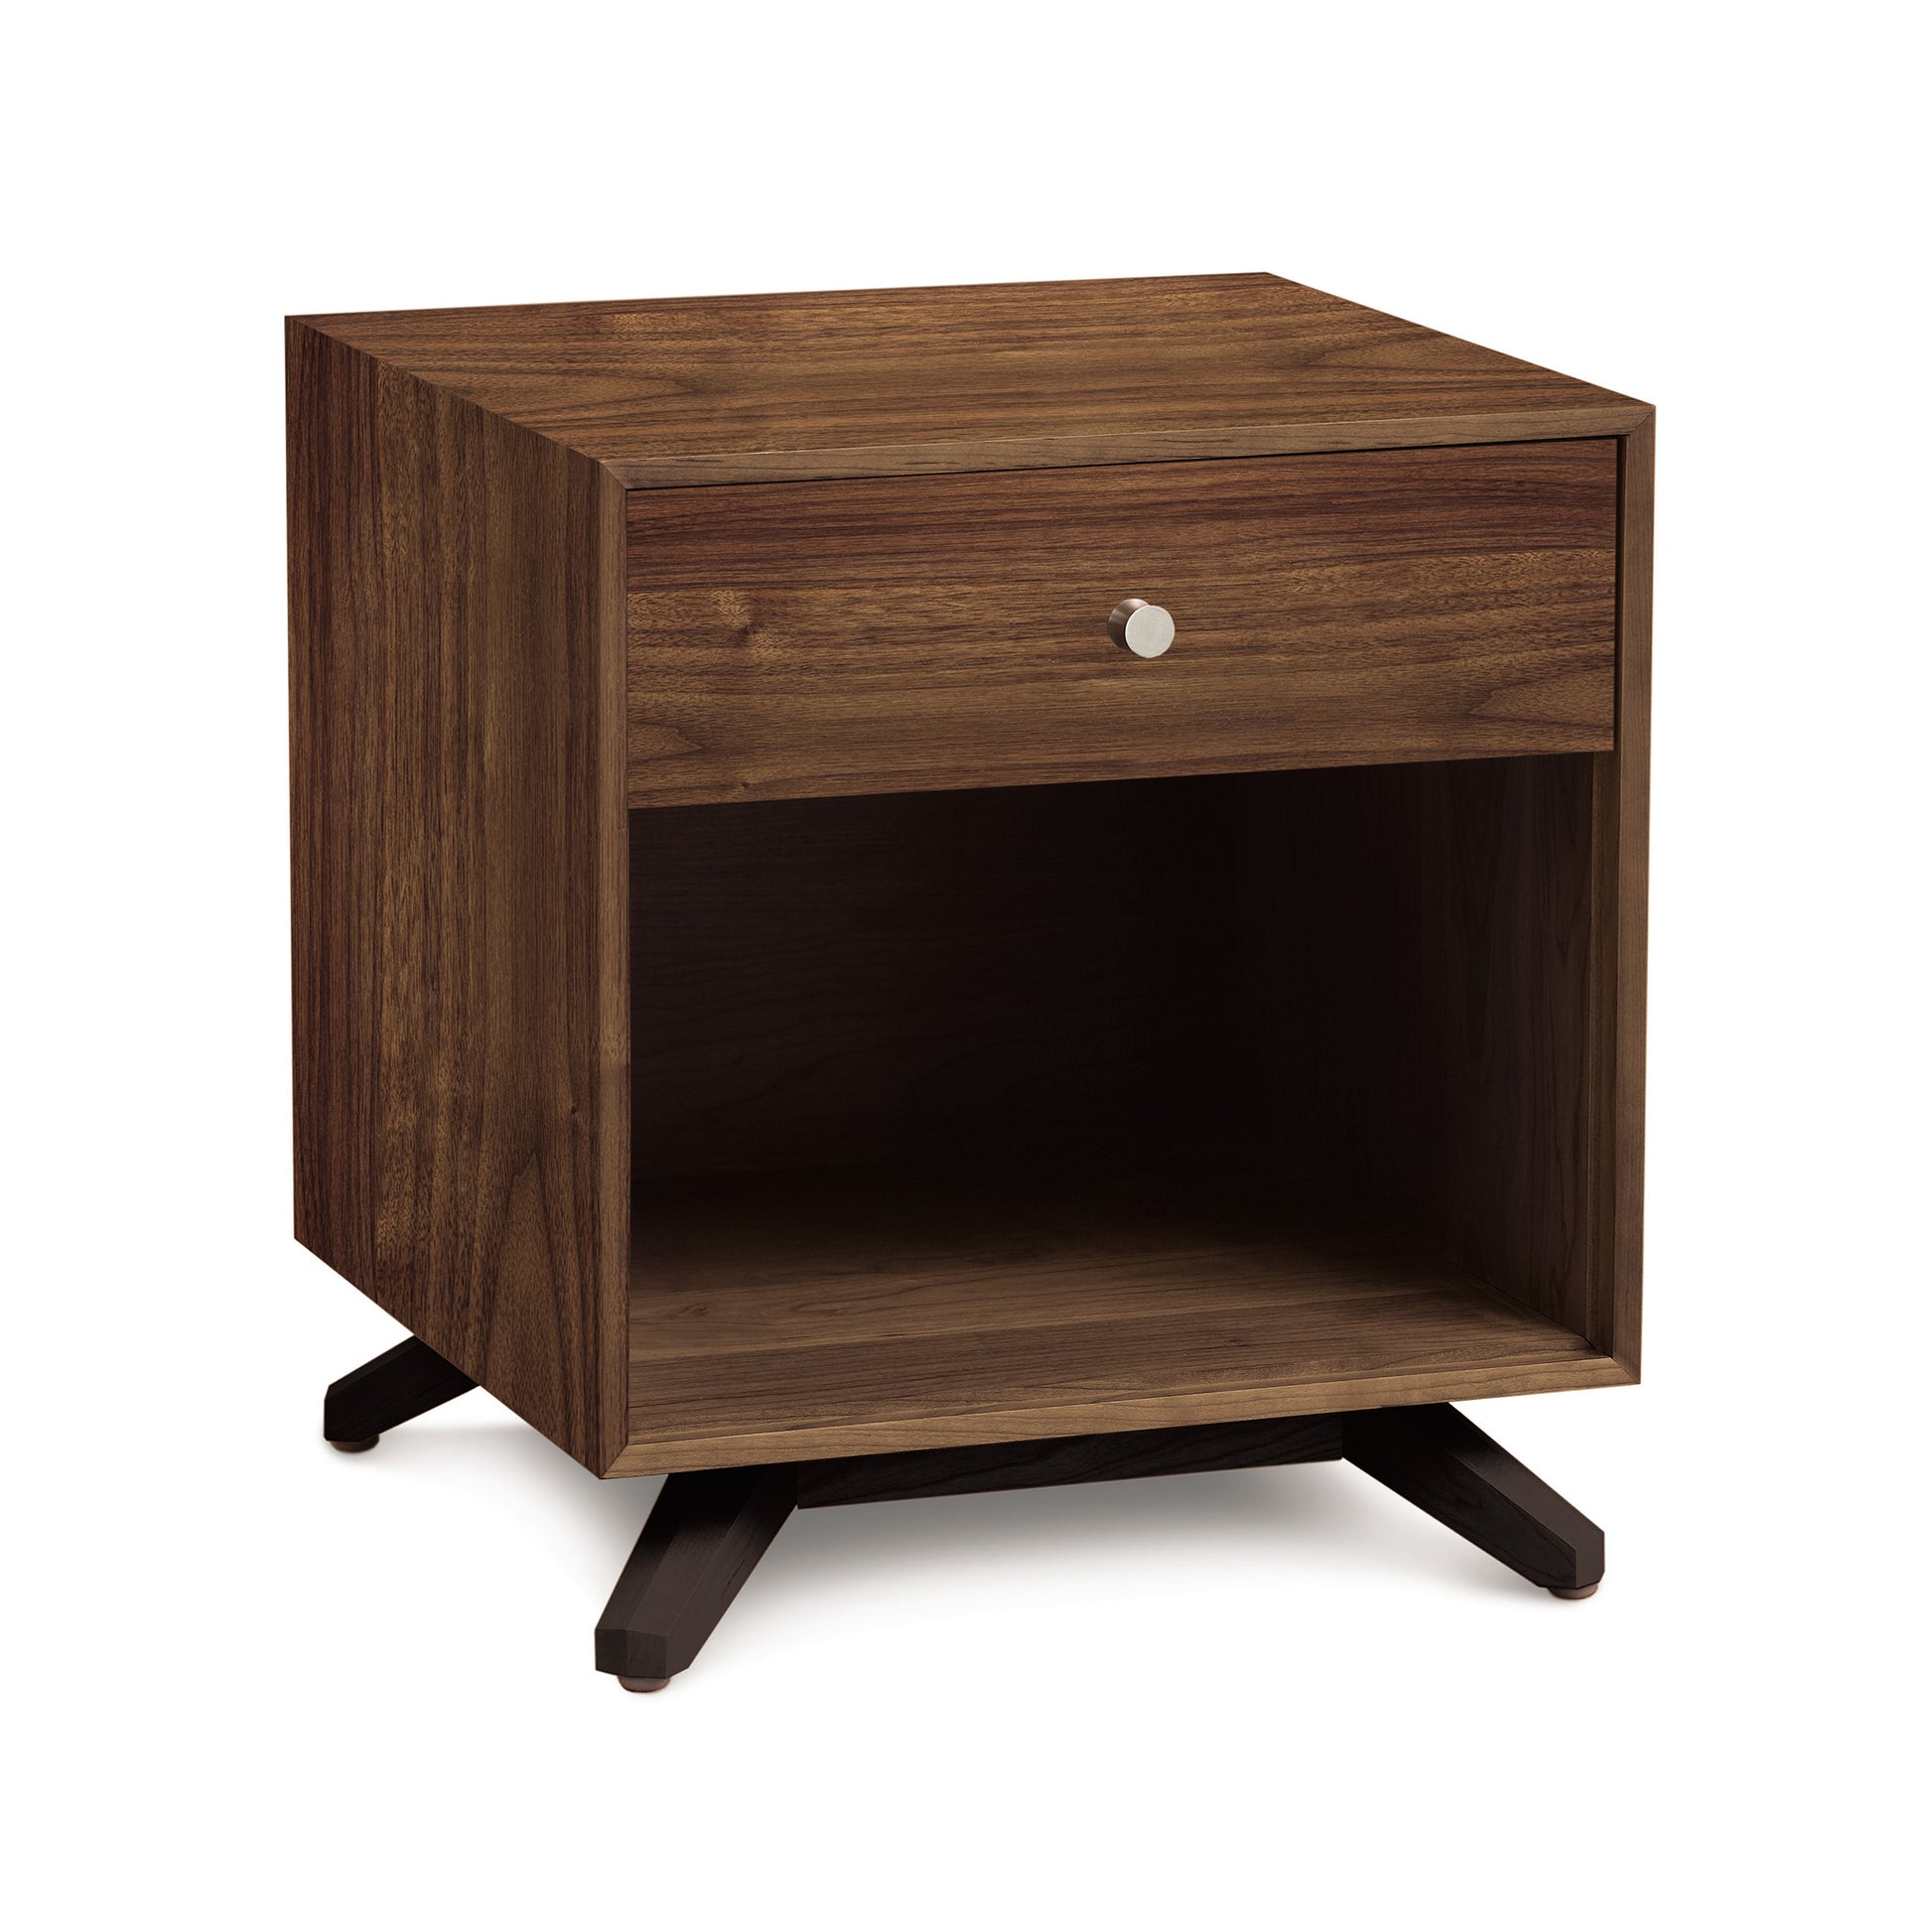 A Copeland Furniture Astrid 1-Drawer Enclosed Shelf Nightstand with an open shelf and a single drawer, set on angled legs.